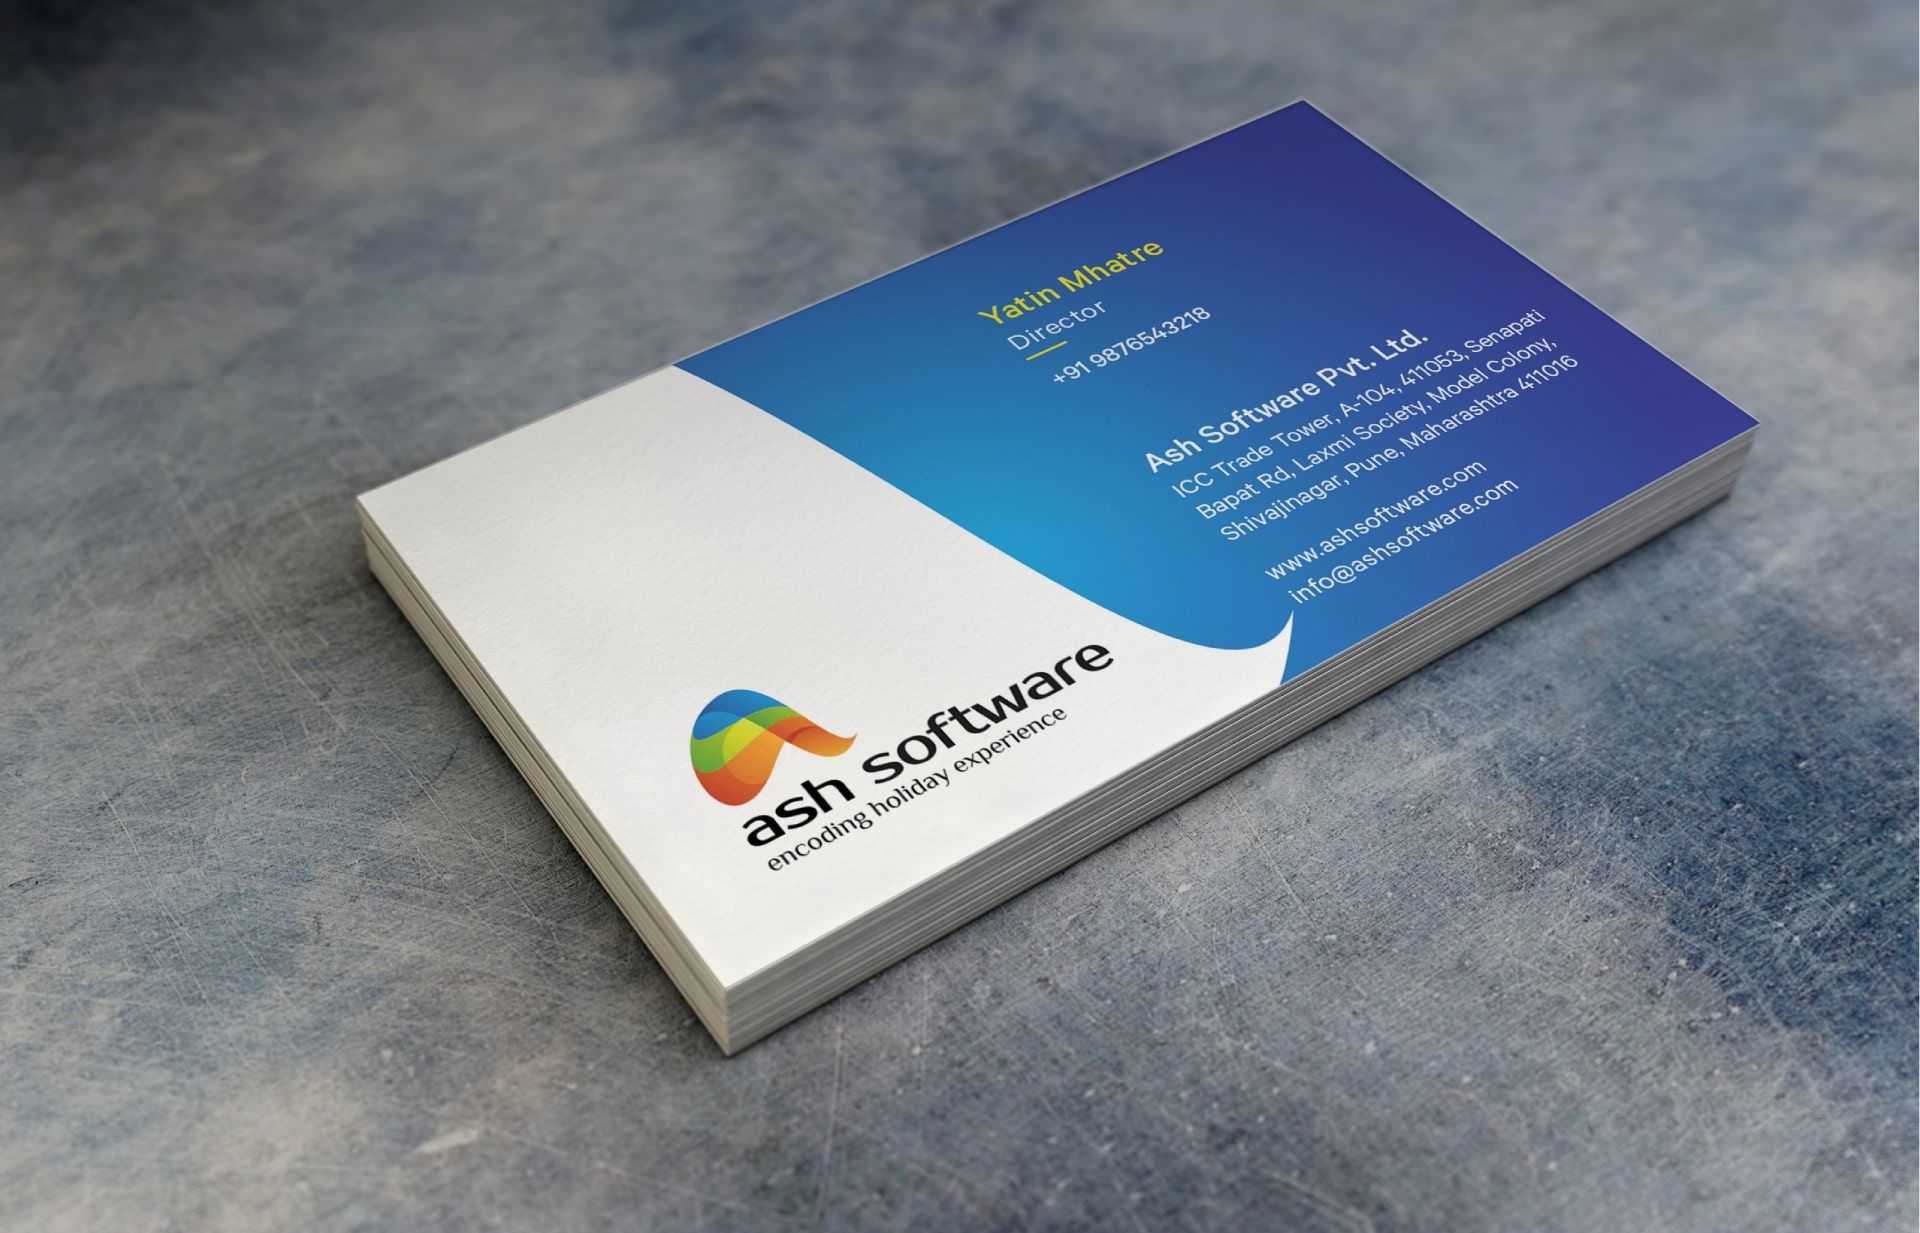 ash software business card